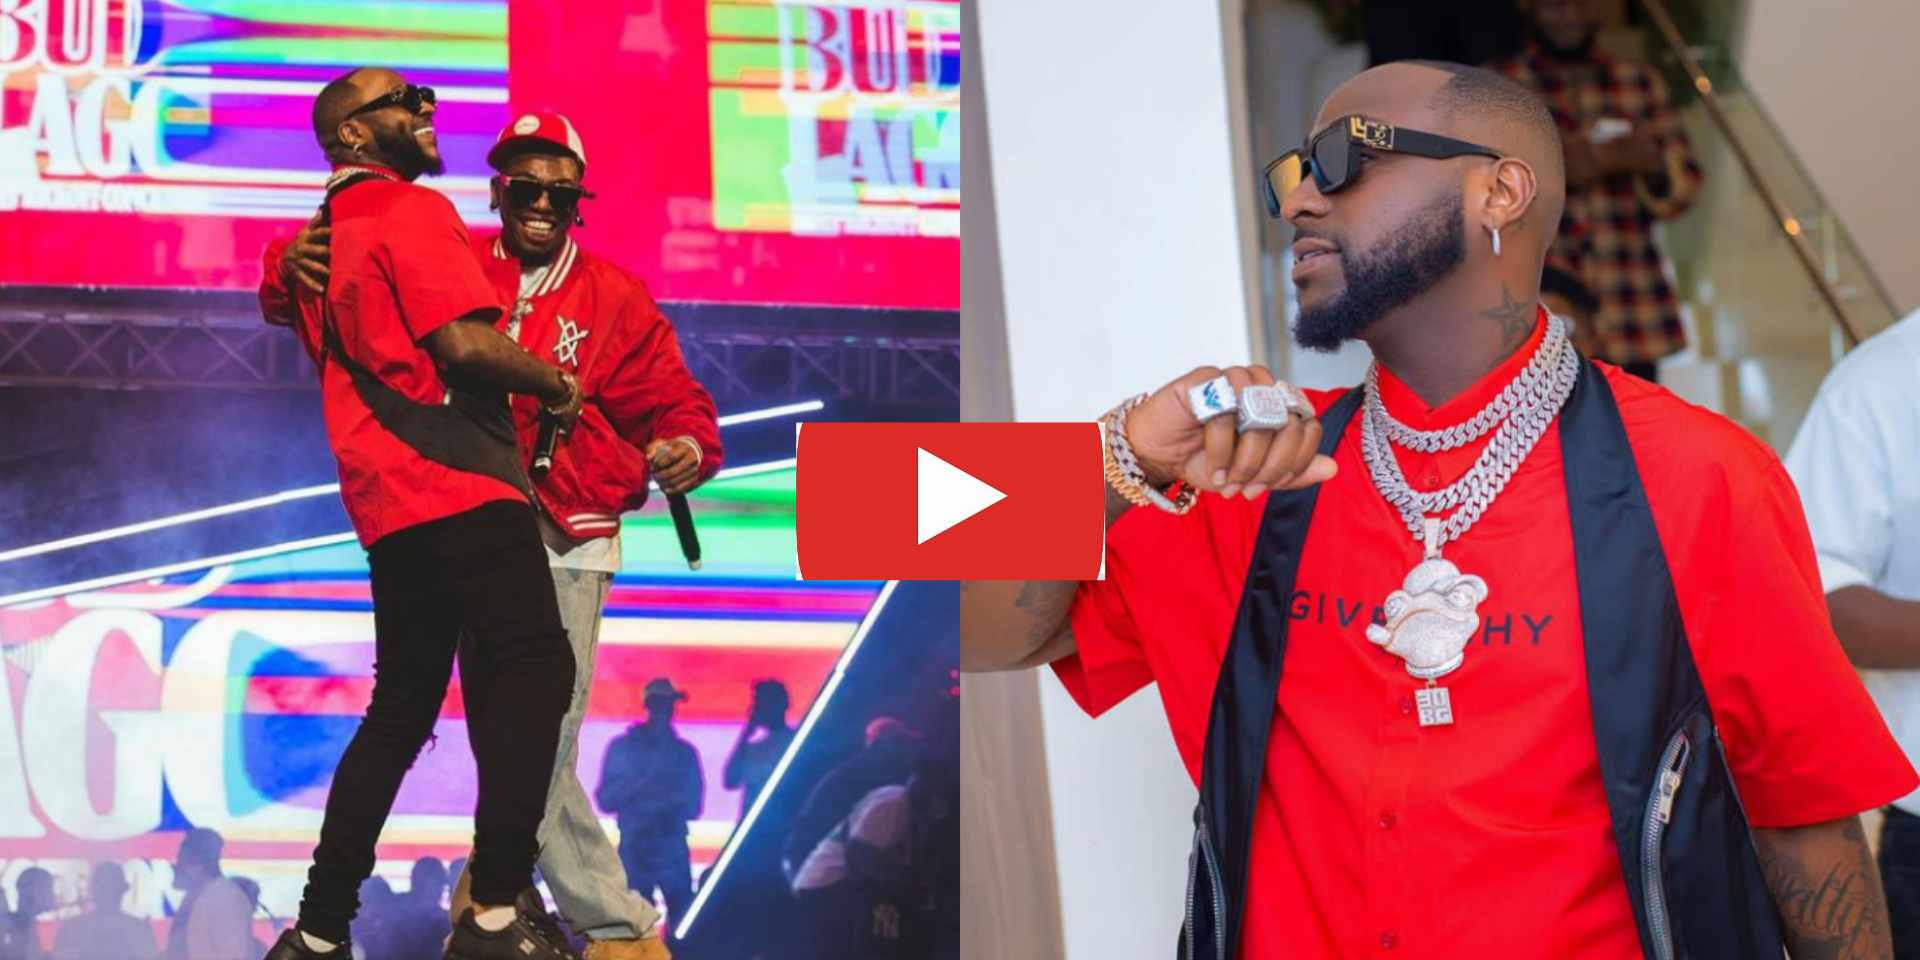 "Only where Dem de do doremi I go go" - Davido's snippet of yet to be released song sets social media abuzz; fans call him 'the greatest' [Video]